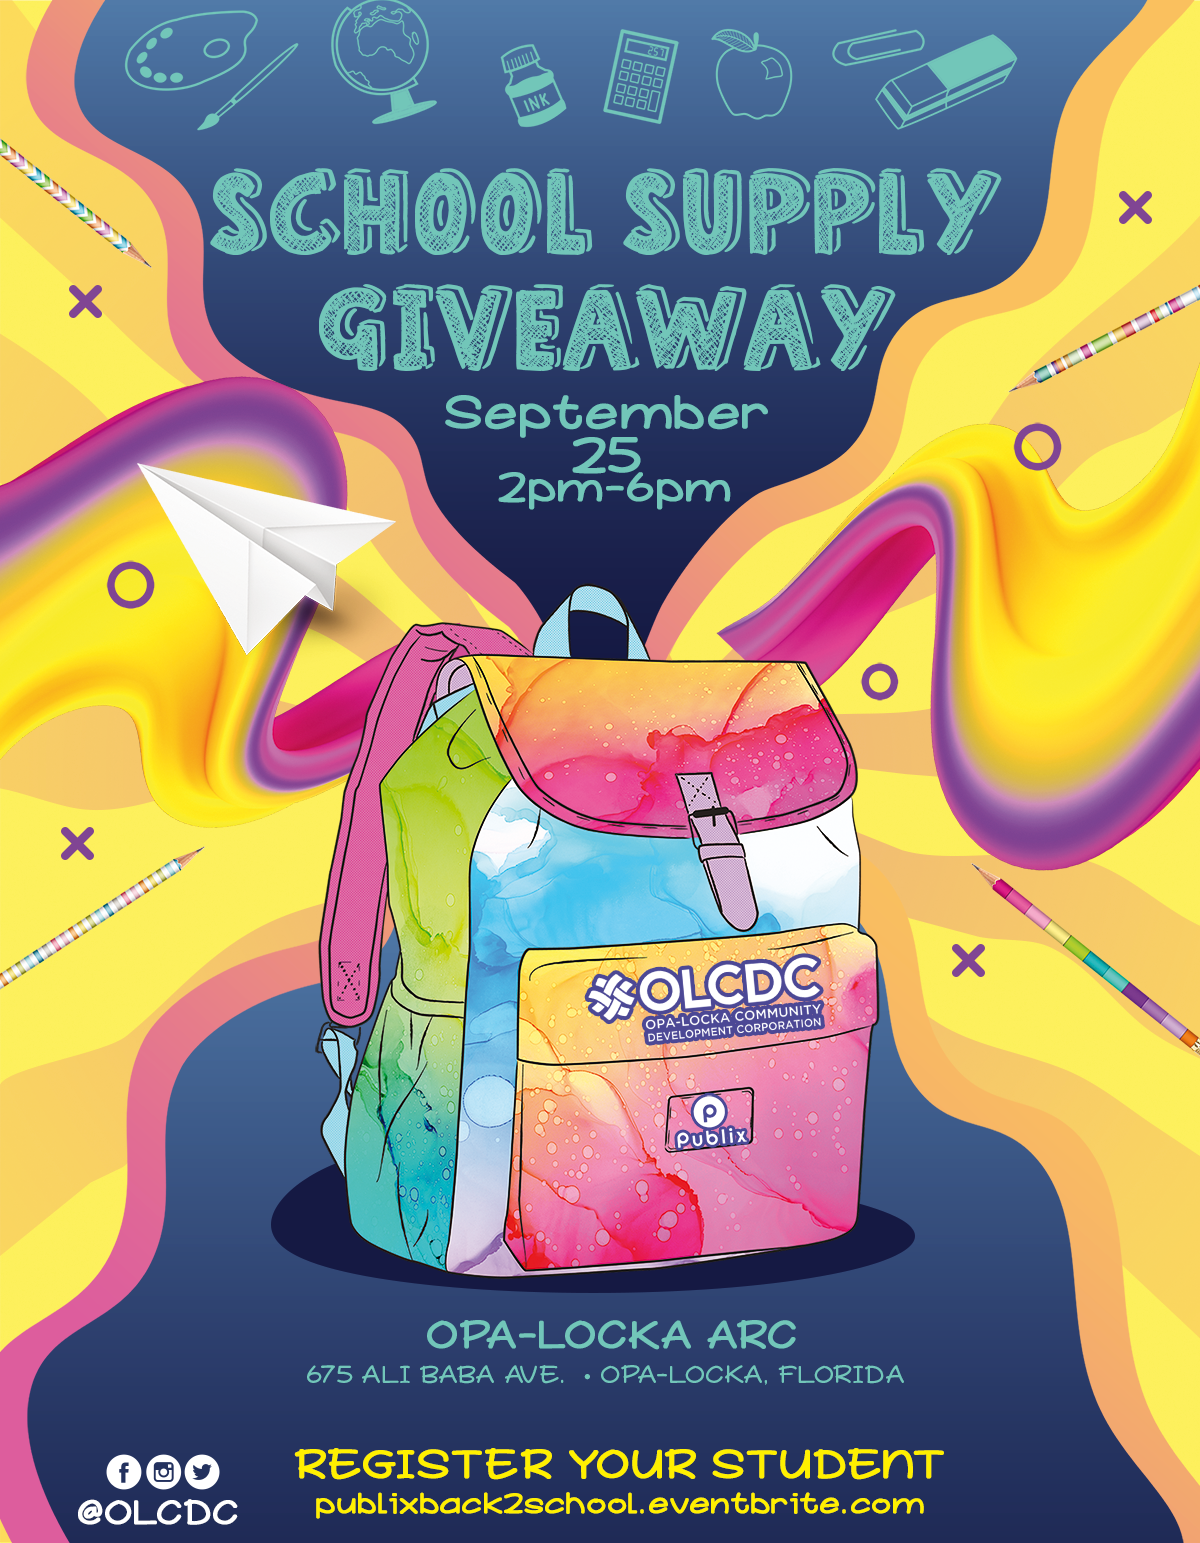 School Supply Giveaway 9/25/19 The Soul Of Miami